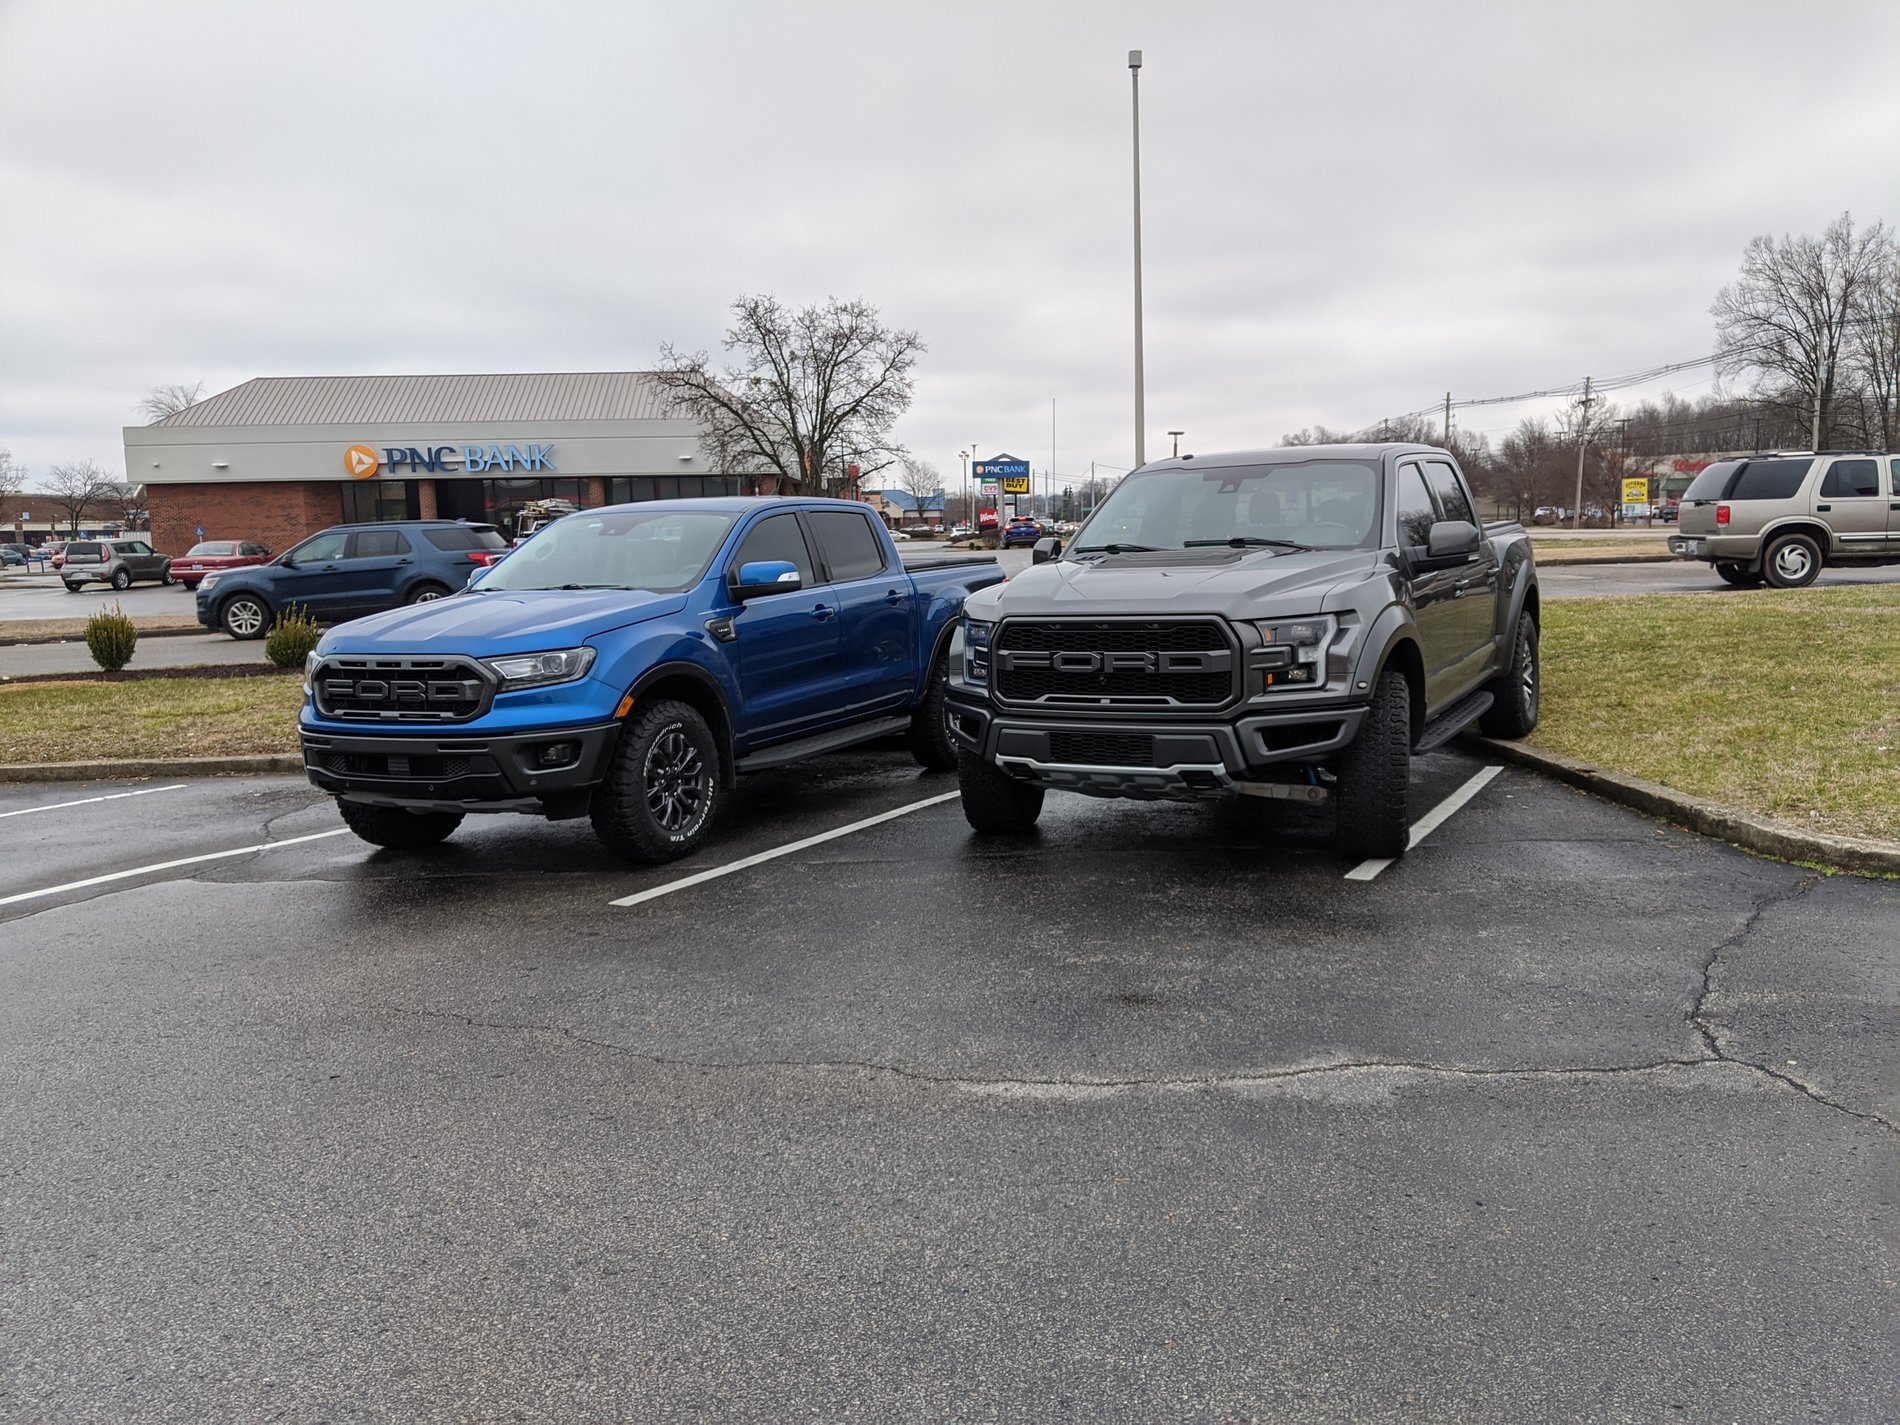 Ford Ranger Look at my Ranger parked next to stuff With Raptor Jan 2020